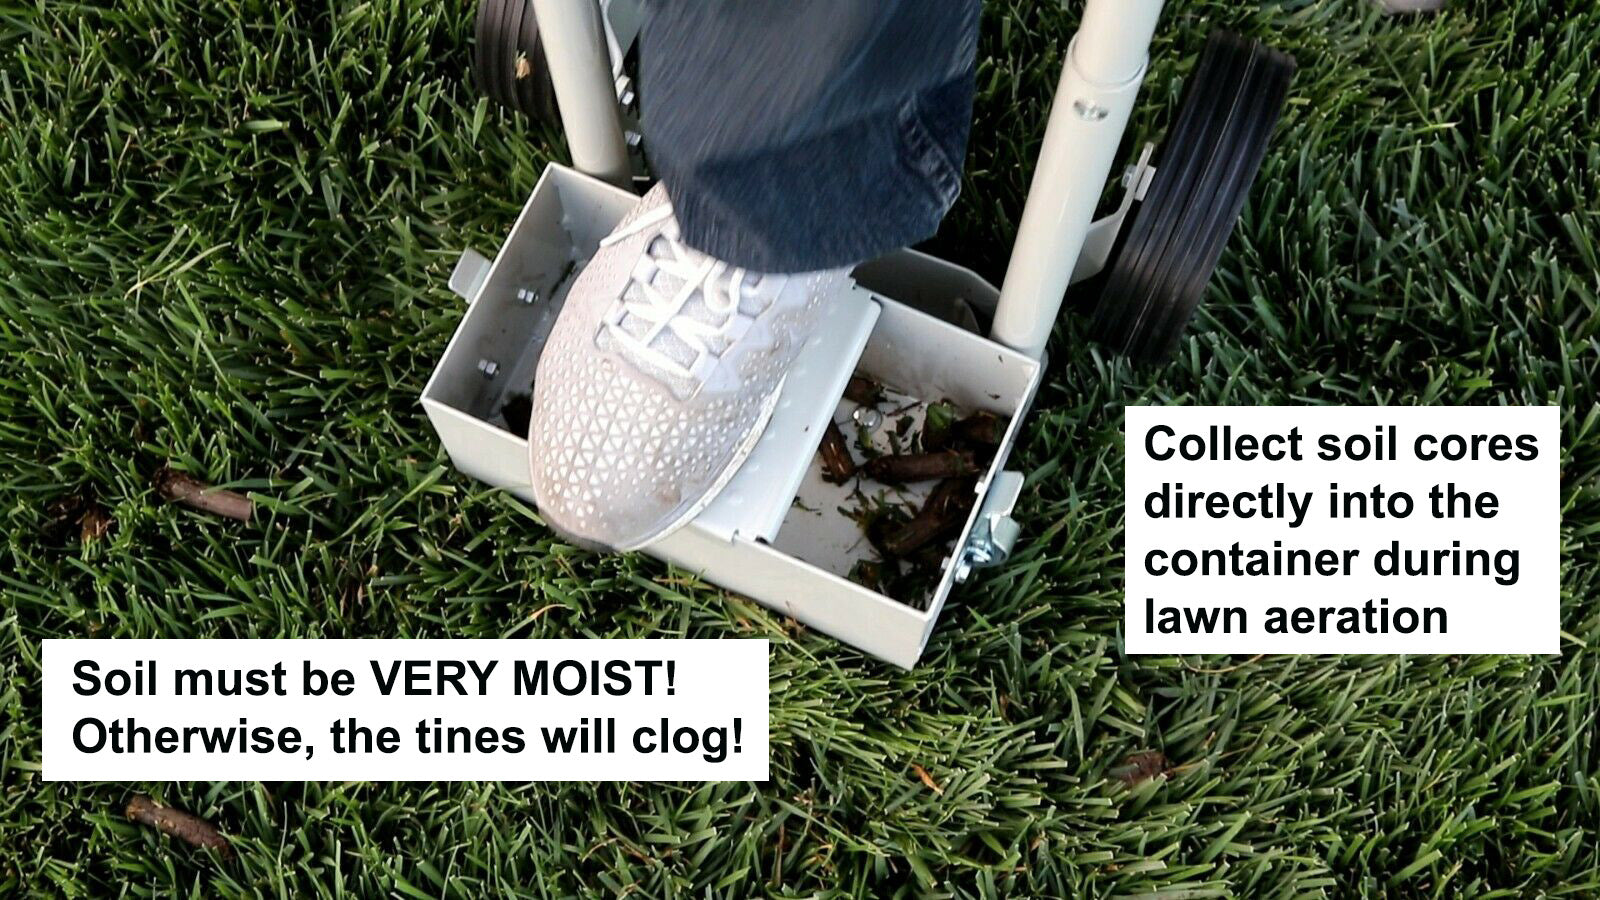 Step 'N Tilt® Core Lawn Aerator Version 3 (with Container)